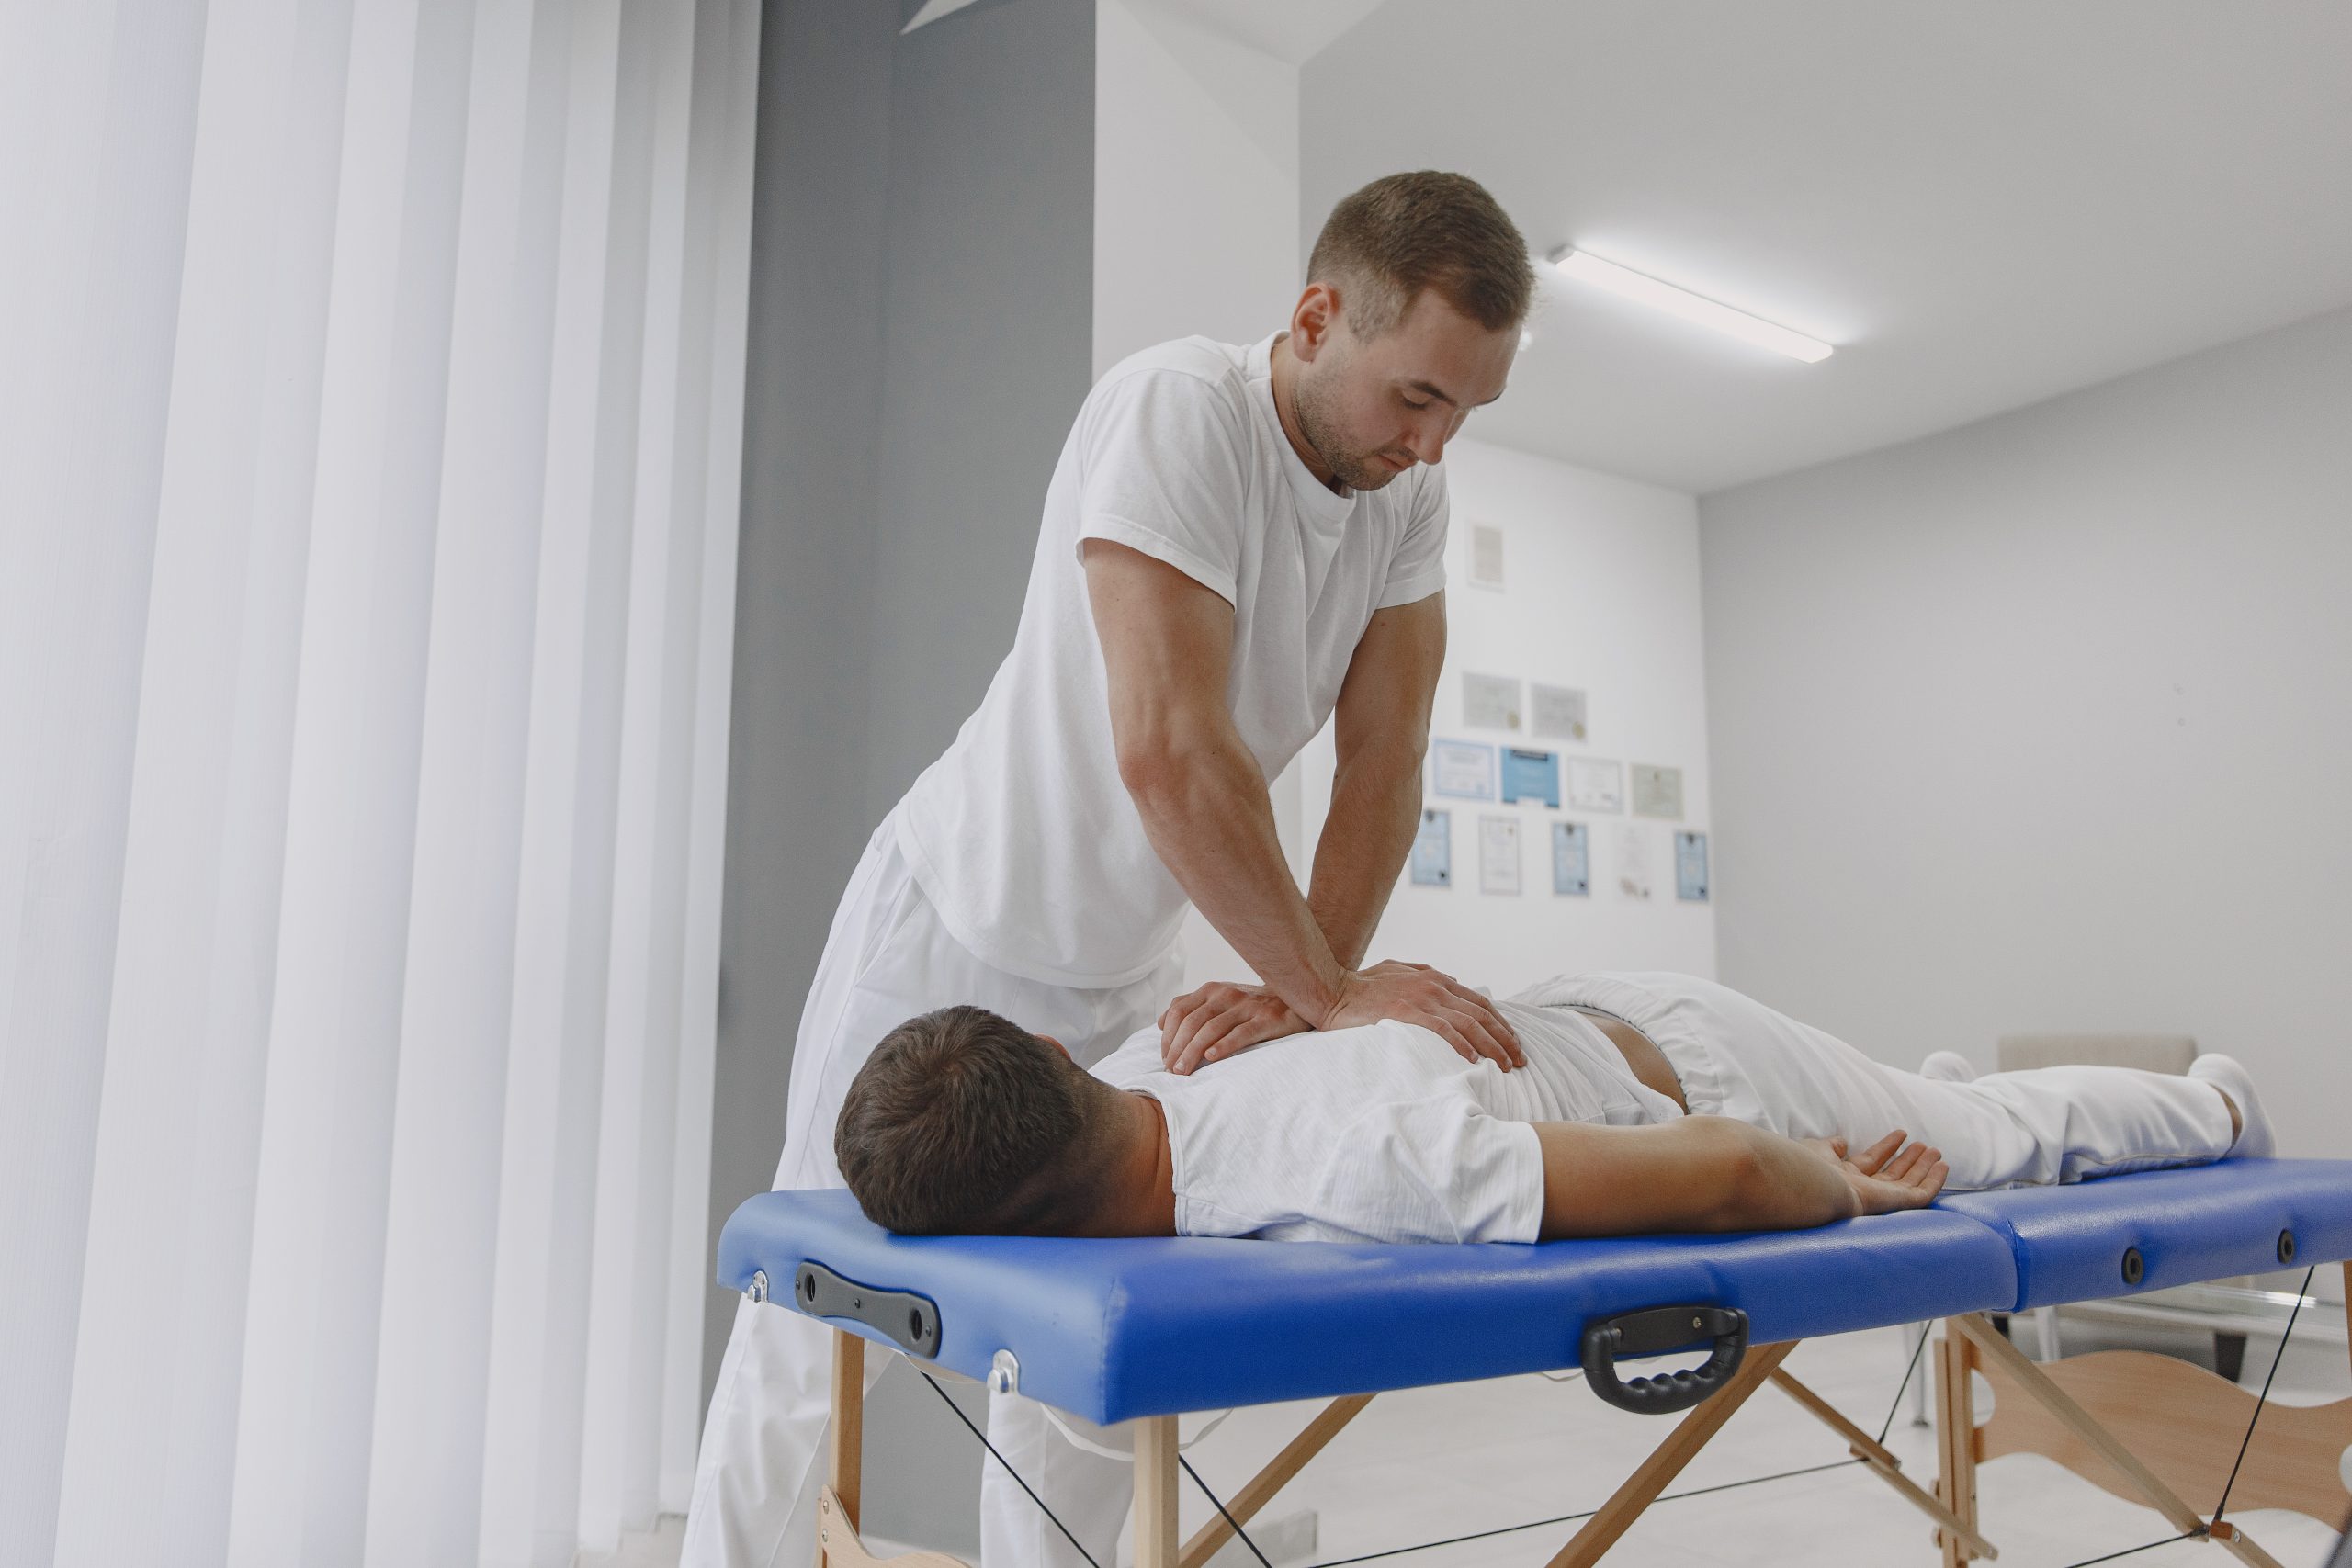 Chiropractor providing care to a patient lying on a table